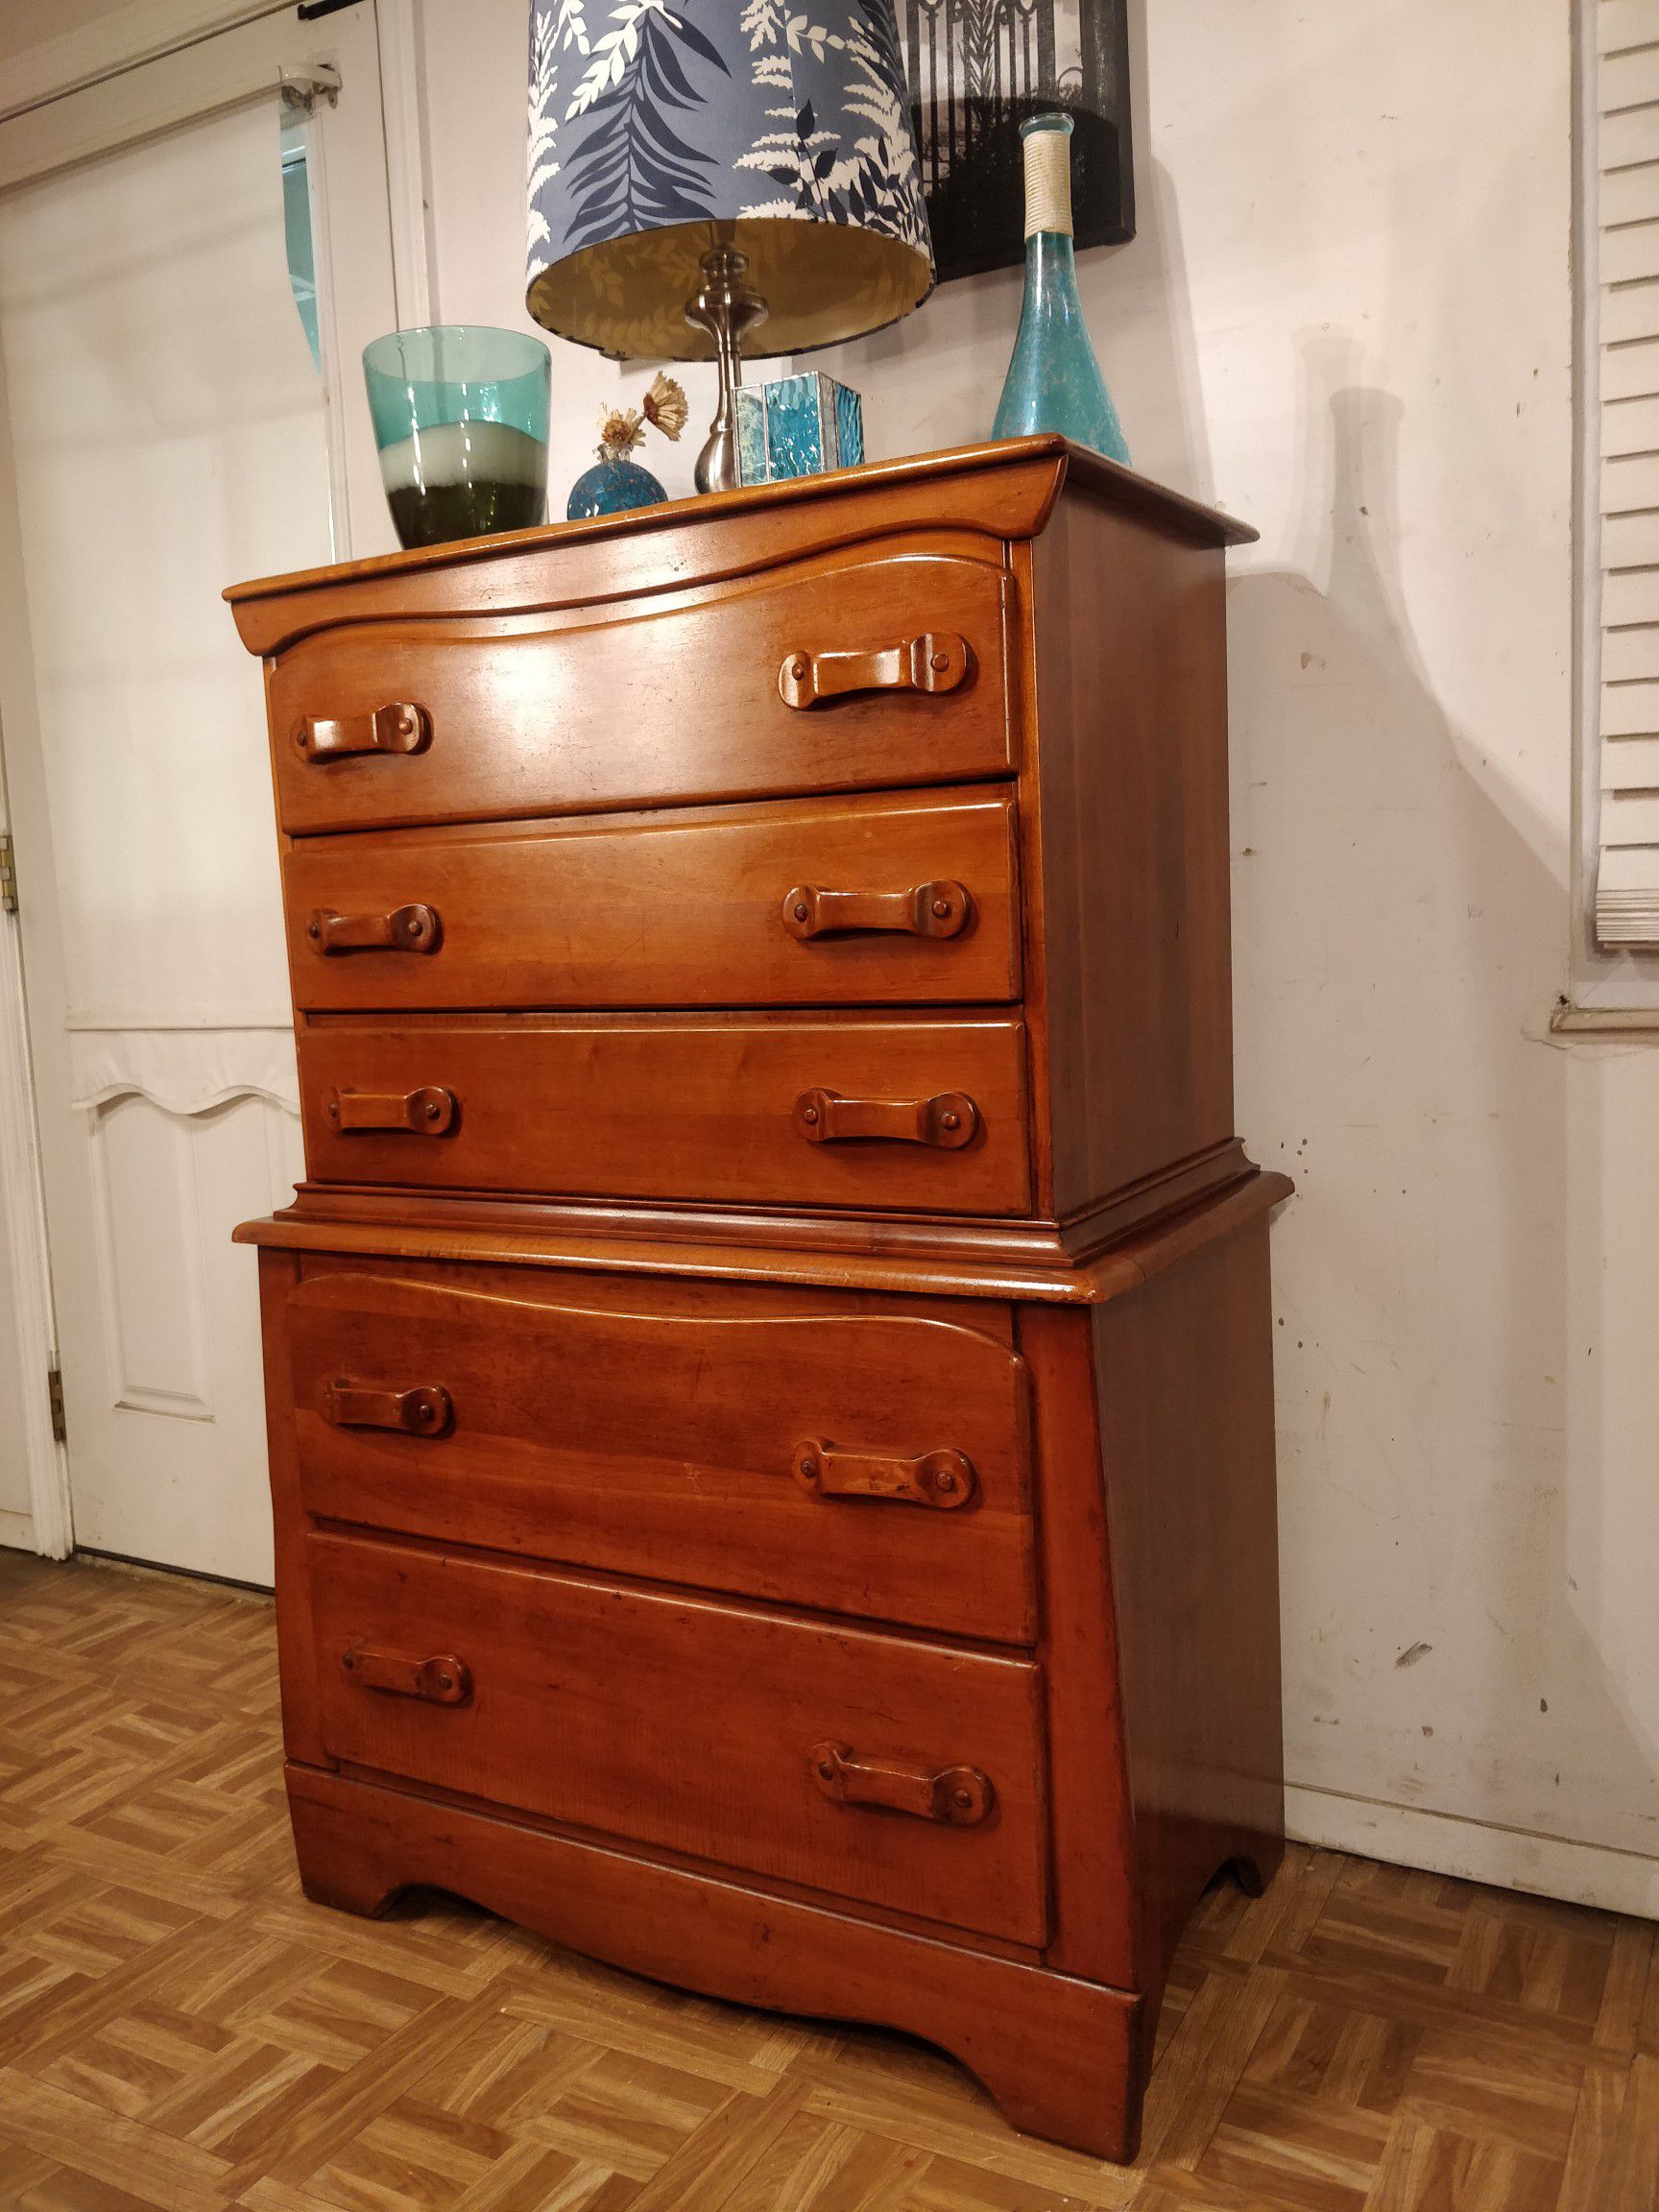 Solid wood chest dresser with big drawers in good condition all drawers working, dovetail drawers driveway pickup. L34"*W19"*H50"